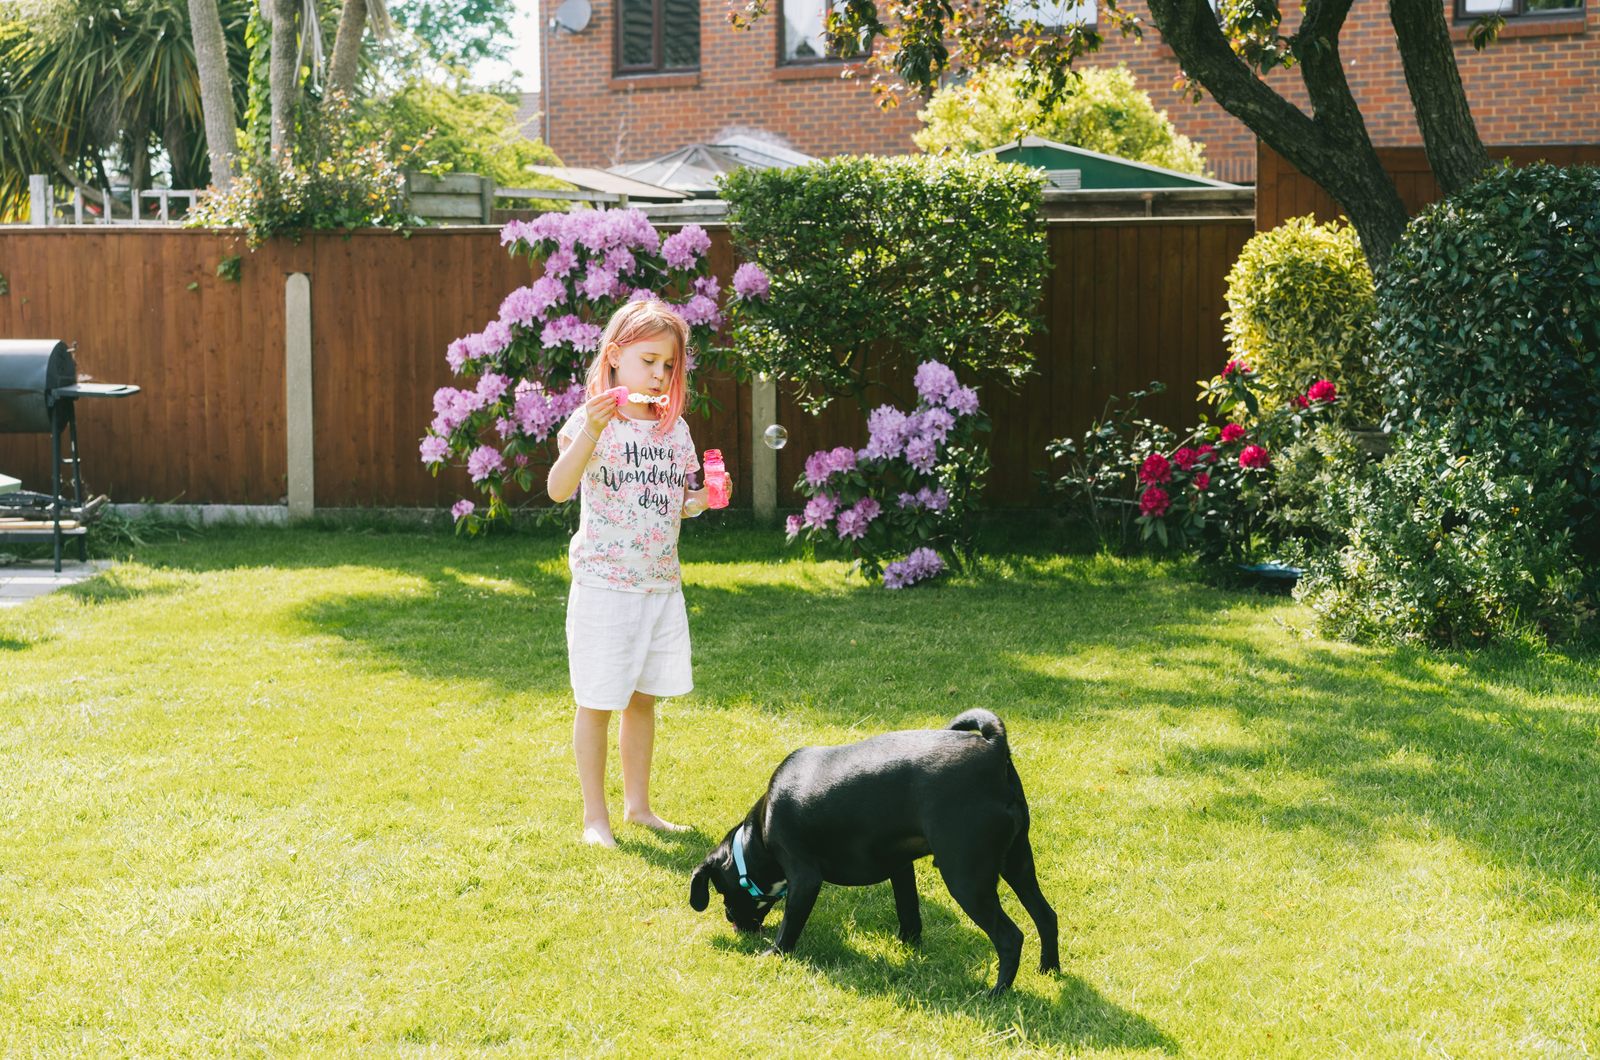 Little girl blowing soap bubbles and playing with the dog in the garden